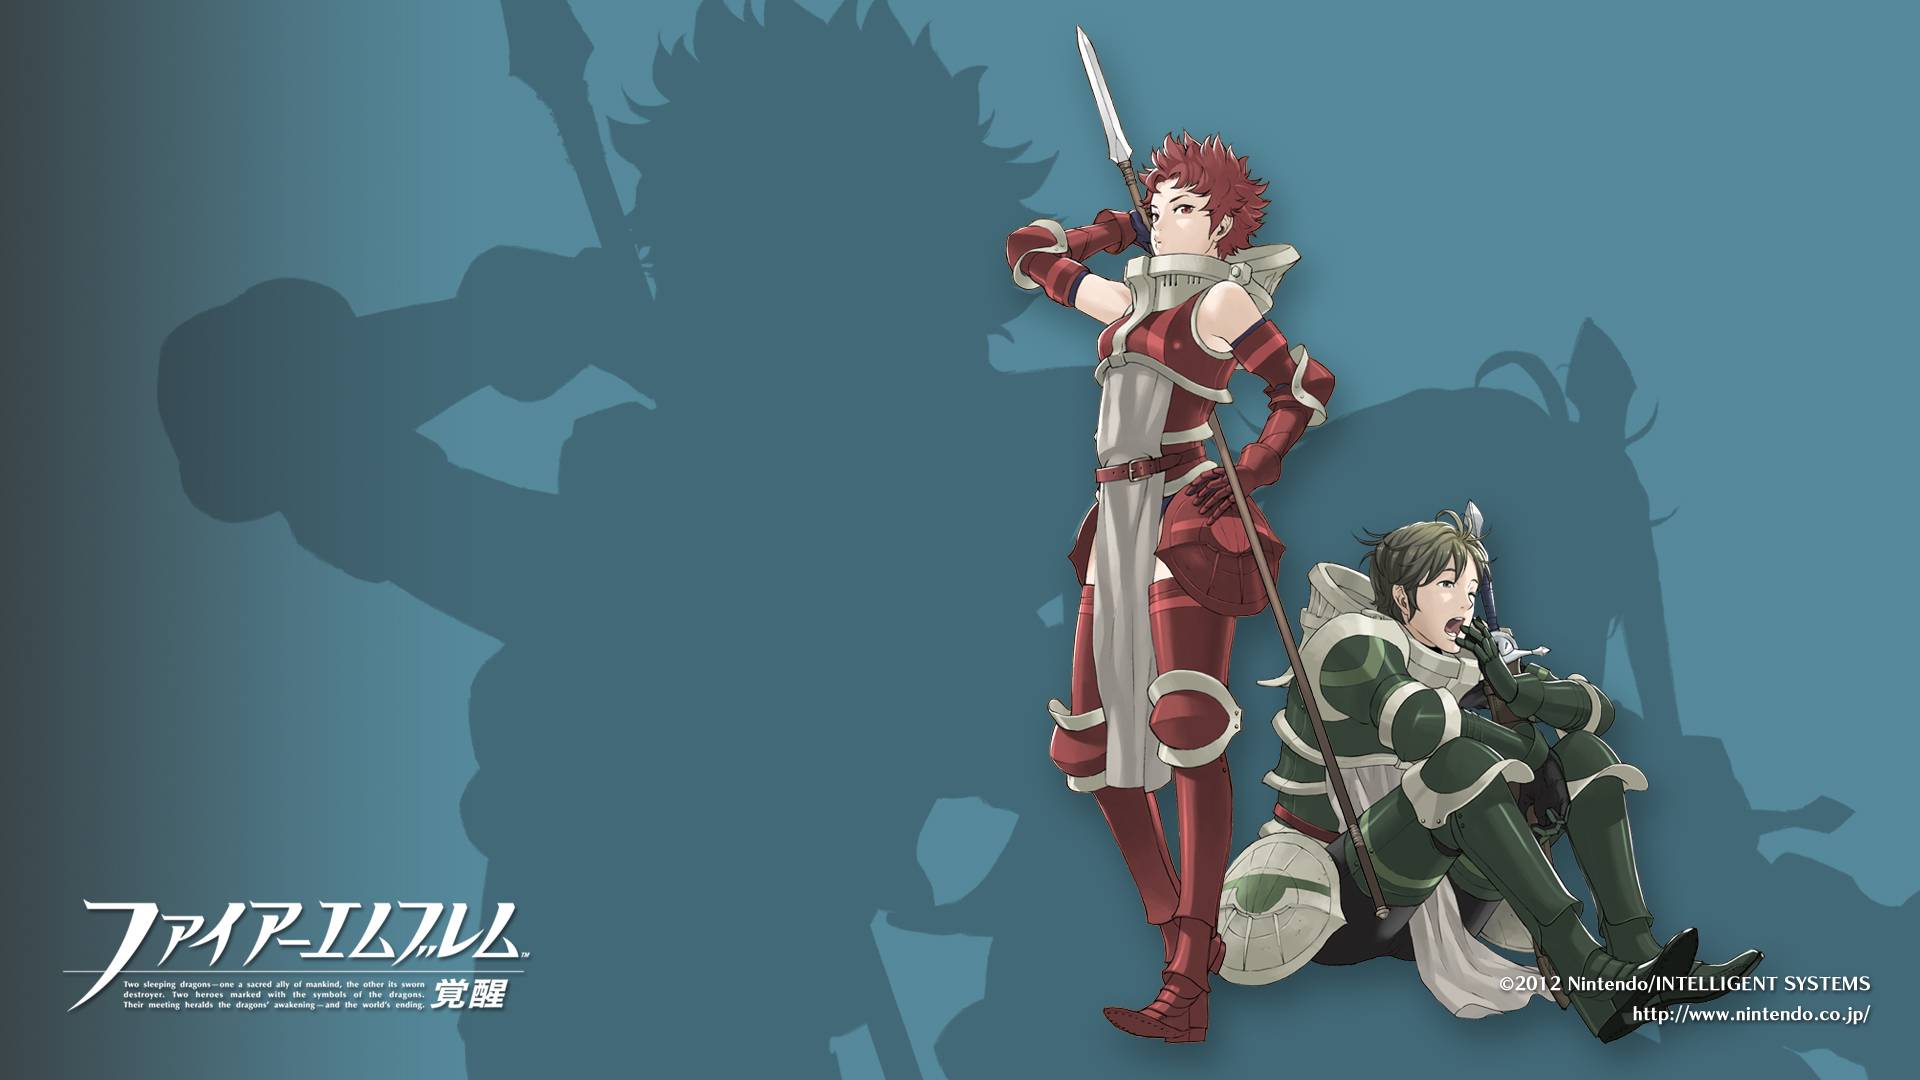 Sully and Stahl Emblem Wallpaper